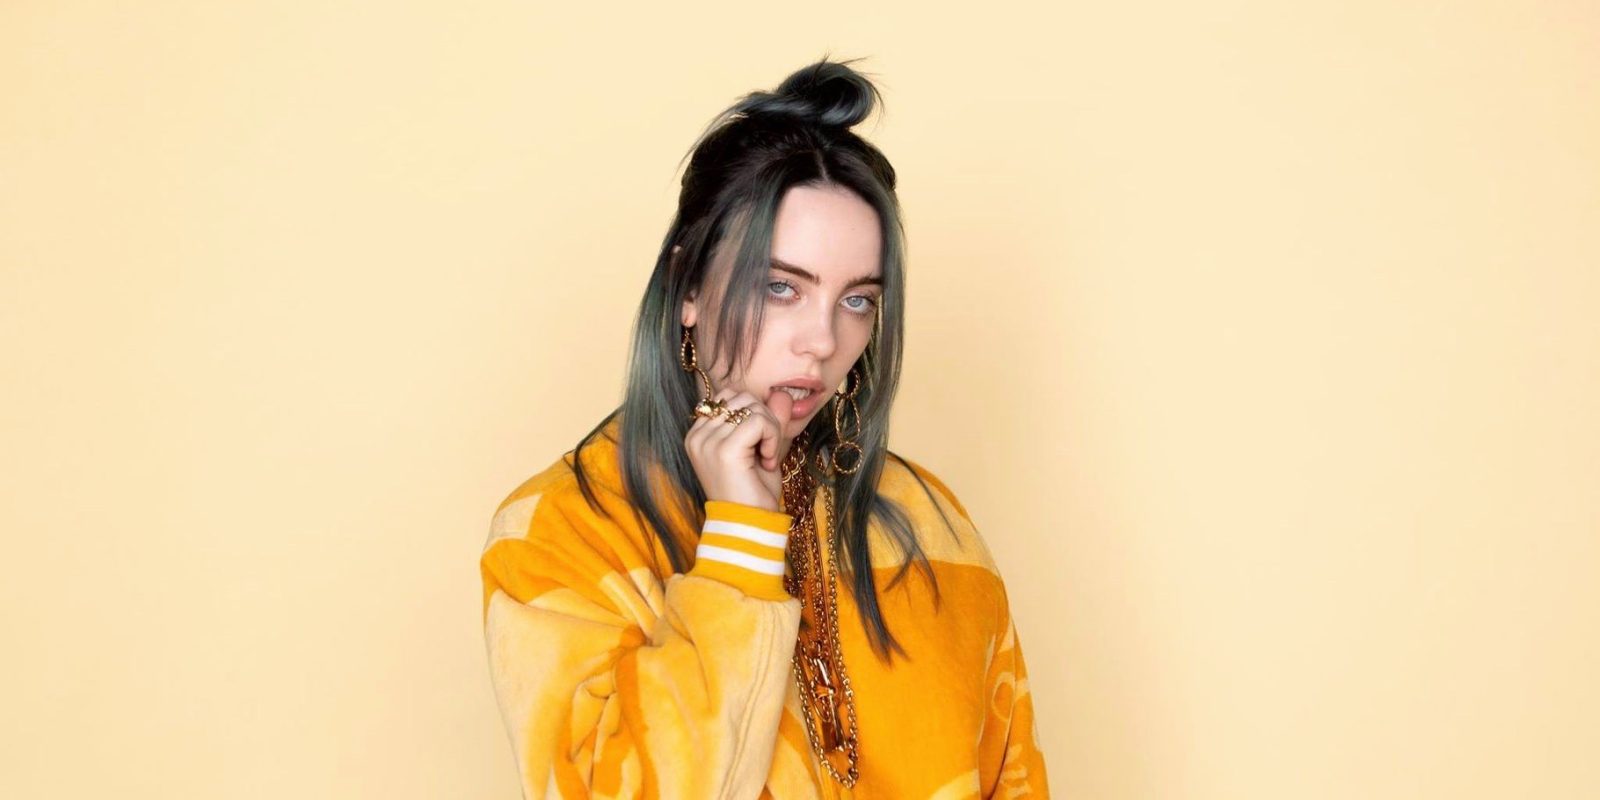 Billie Eilish Documentary to Premiere in Theaters in February 2021 ...